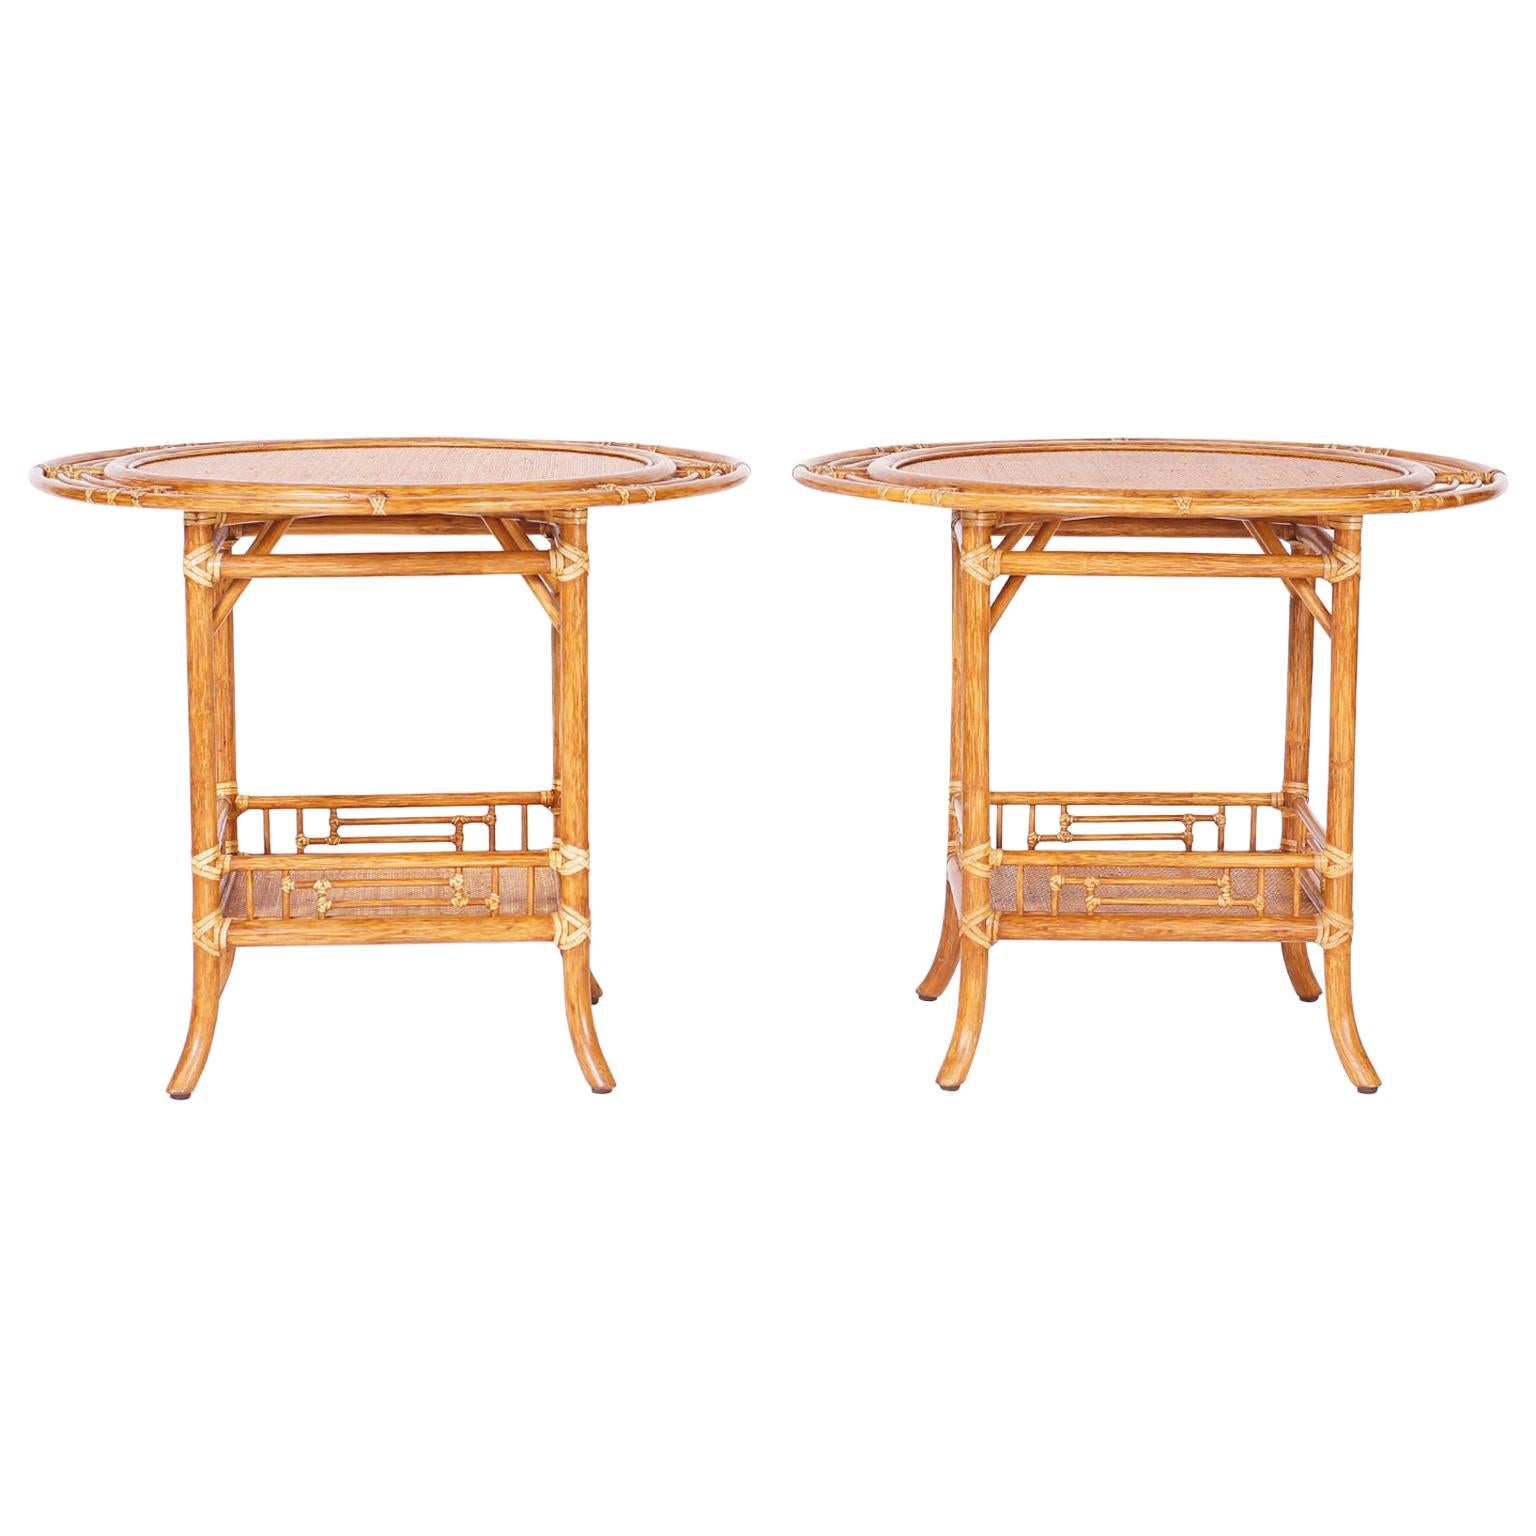 Pair of Vintage Faux Bamboo and Grasscloth Tables